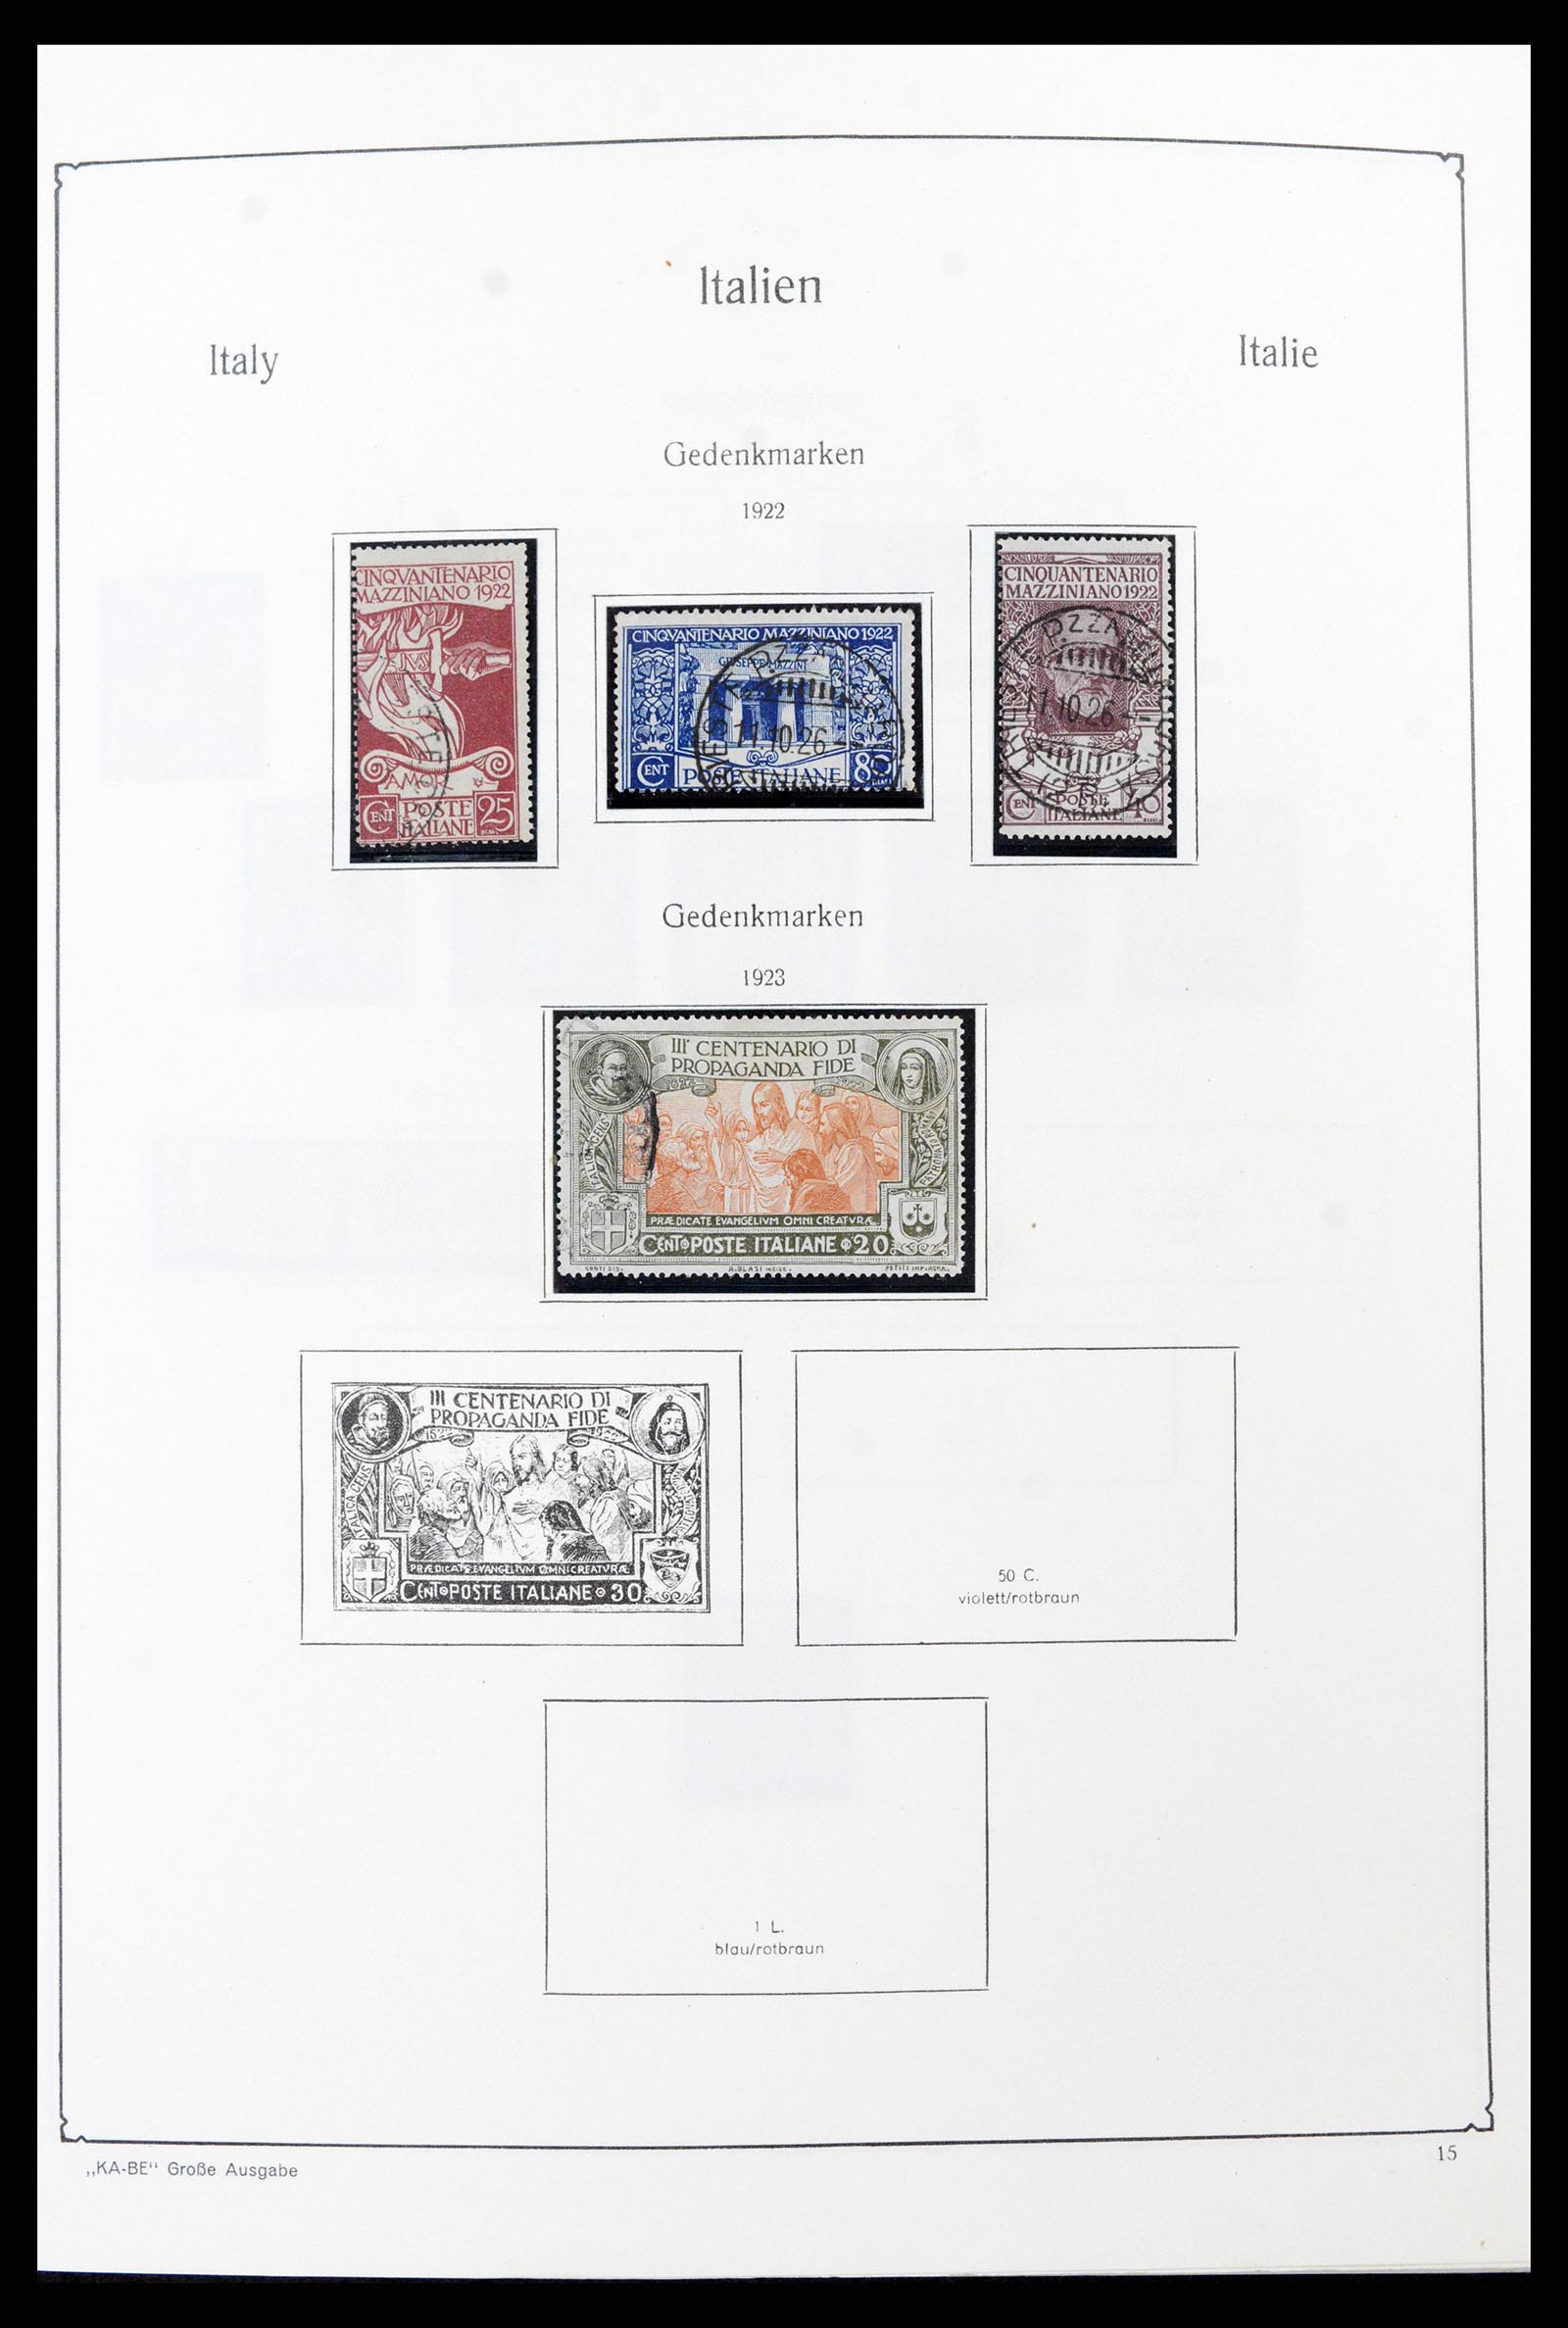 37605 030 - Stamp collection 37605 Italy and States 1855-1974.